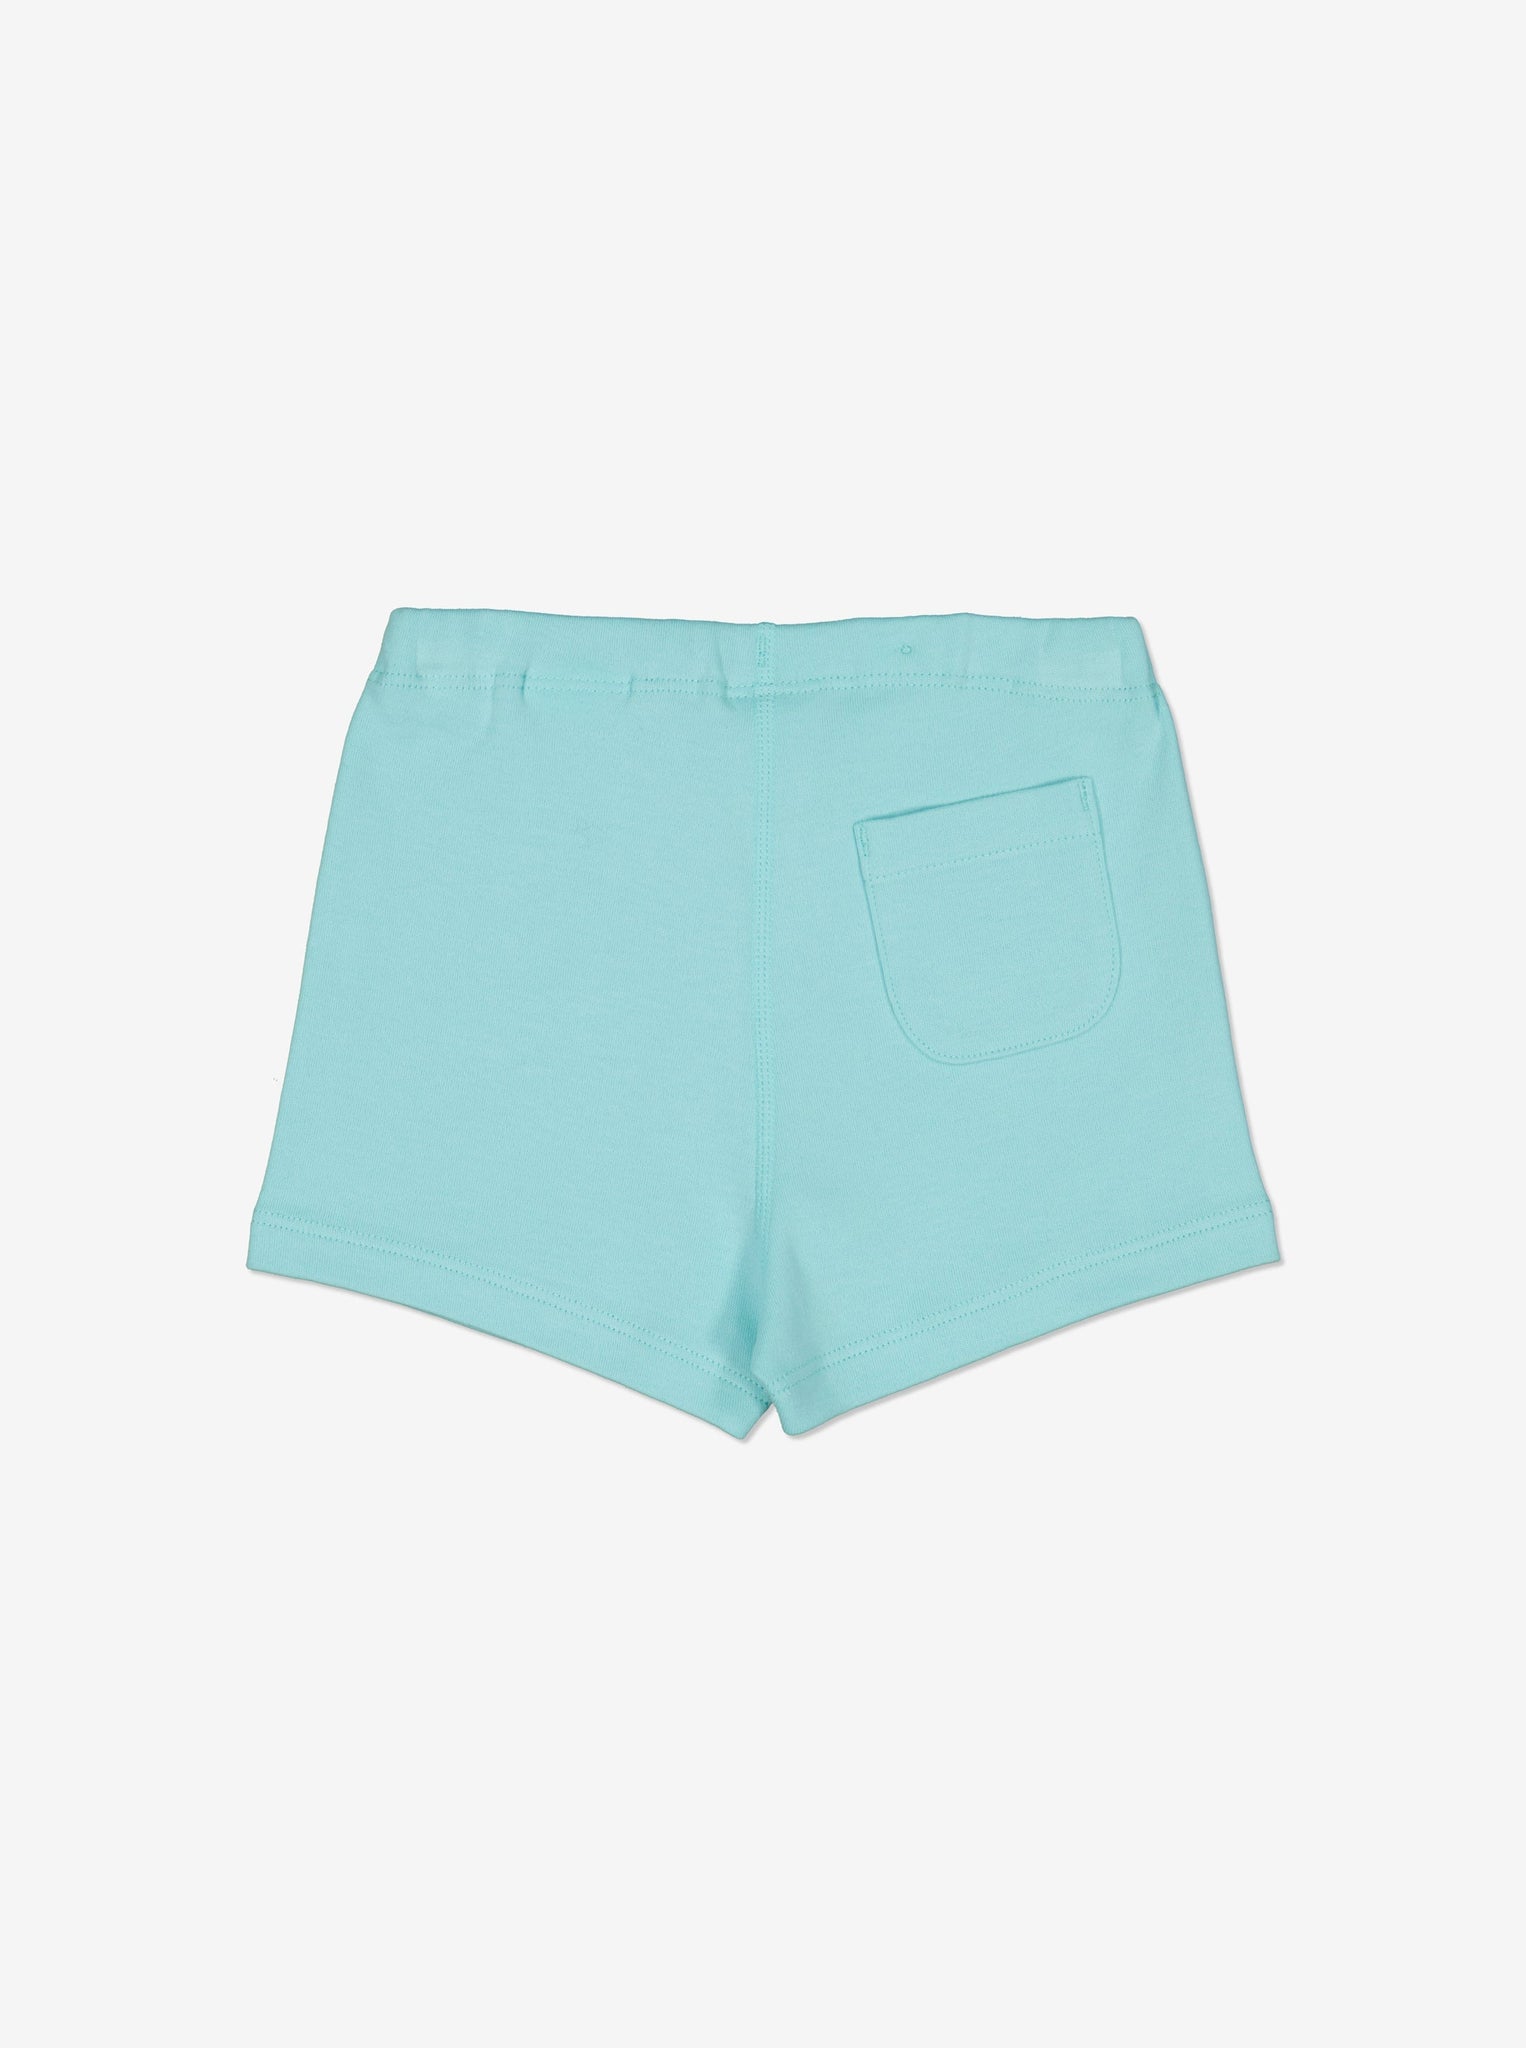 Organic Cotton Blue  Baby Shorts from Polarn O. Pyret Kidswear. Made using sustainable sourced materials.